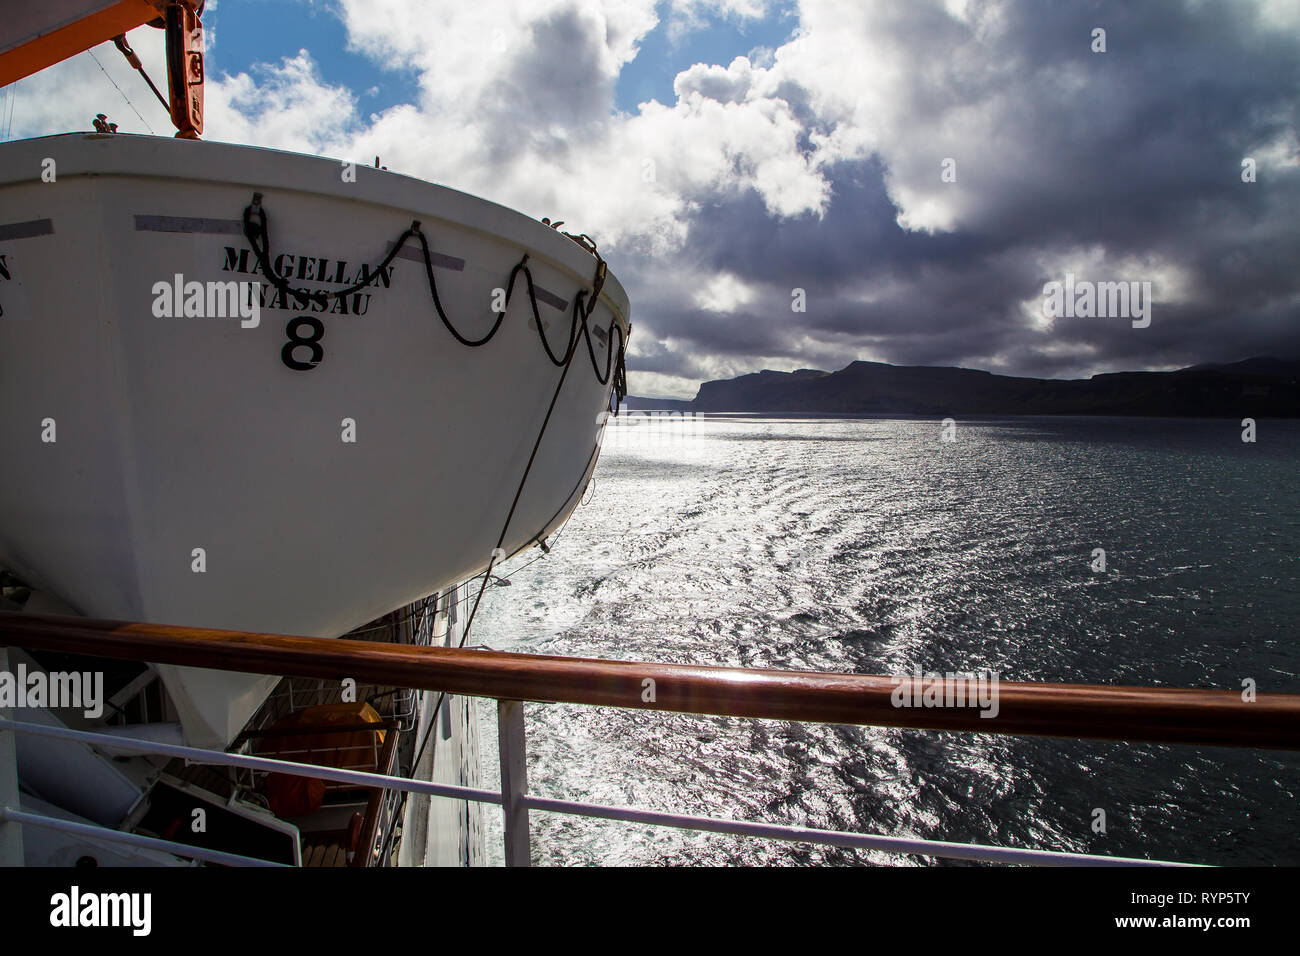 Lifeboat on ship with stunning view in background. Stock Photo